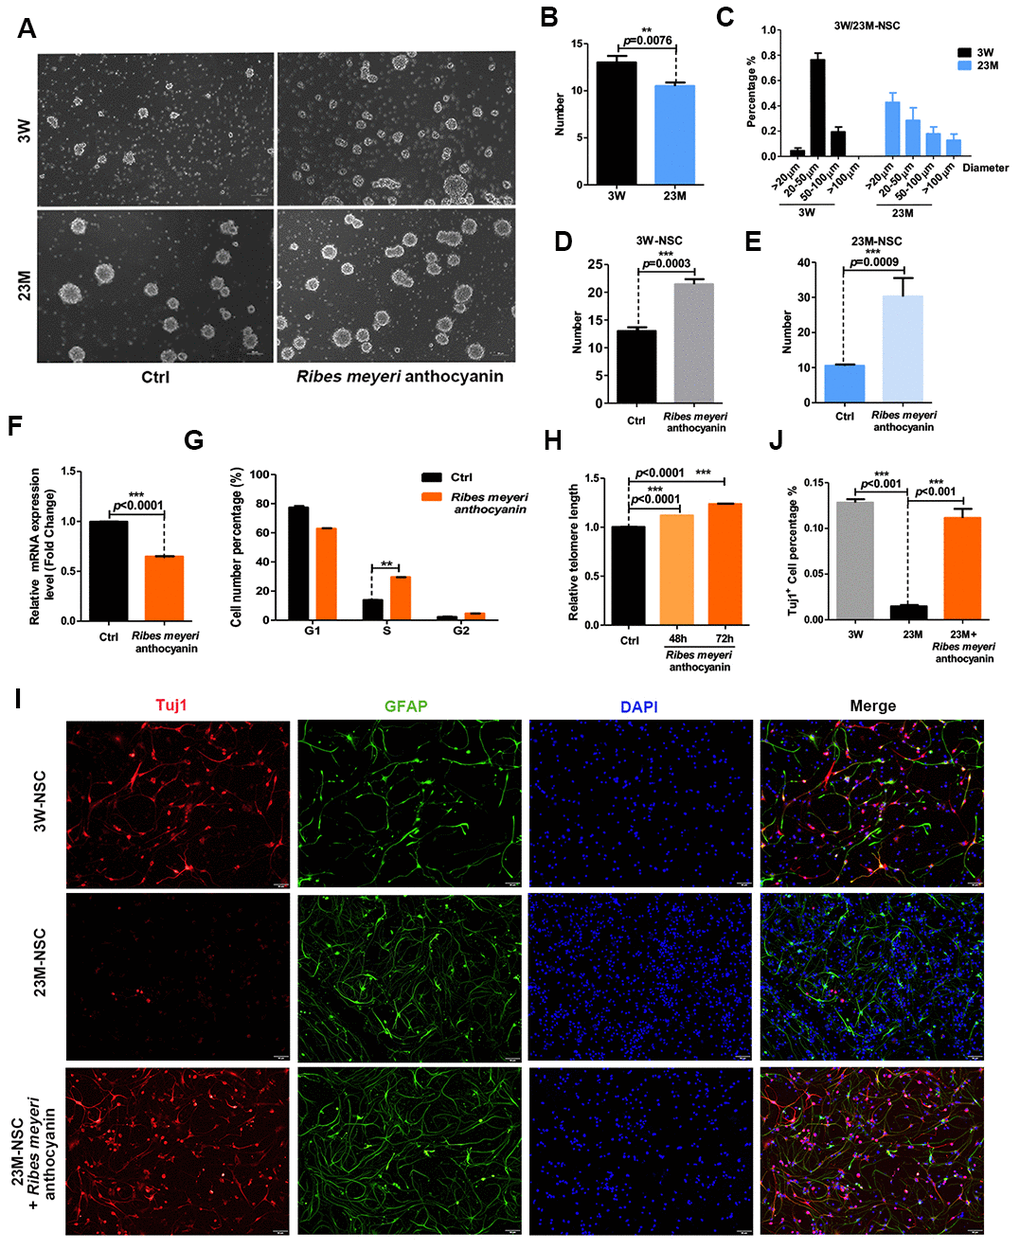 Ribes meyeri anthocyanins rescue the senescence phenotype of mouse neural stem cells (mNSCs). (A) Neurospheres clonally derived from 23-month-old (23M-NSC) and 3-week-old (3W-NSC) mouse brains and treated with 100 pg/mL R. meyeri anthocyanins. (B) Differences in neurosphere numbers between 23M-NSC and 3W-NSC. (C) The shape of 3W-NSC neurospheres was more uniform, with an increased number and size (20–50 μm) compared with 23M-NSC neurospheres. (D, E) Treatment with R. meyeri anthocyanins increased the numbers of both 3W-NSC- and 23M-NSC-derived neurospheres compared with controls. (F–H) In 23M-NSCs treated with 100 pg/mL R. meyeri anthocyanins for 48 h, p16ink4a mRNA expression, cell cycle, and relative telomere lengths were measured. (F) Cell senescence marker p16ink4a mRNA expression detected by qRT-PCR. (G) Cell cycles were determined using flow cytometry. (H) qRT-PCR detection of relative telomere length. (I) Immunofluorescence staining of TuJ1 and GFAP in 23M-NSCs treated with R. meyeri anthocyanins and control. (J) Quantification of (I). Data are presented as the mean ± SD of three independent experiments. *P P P 